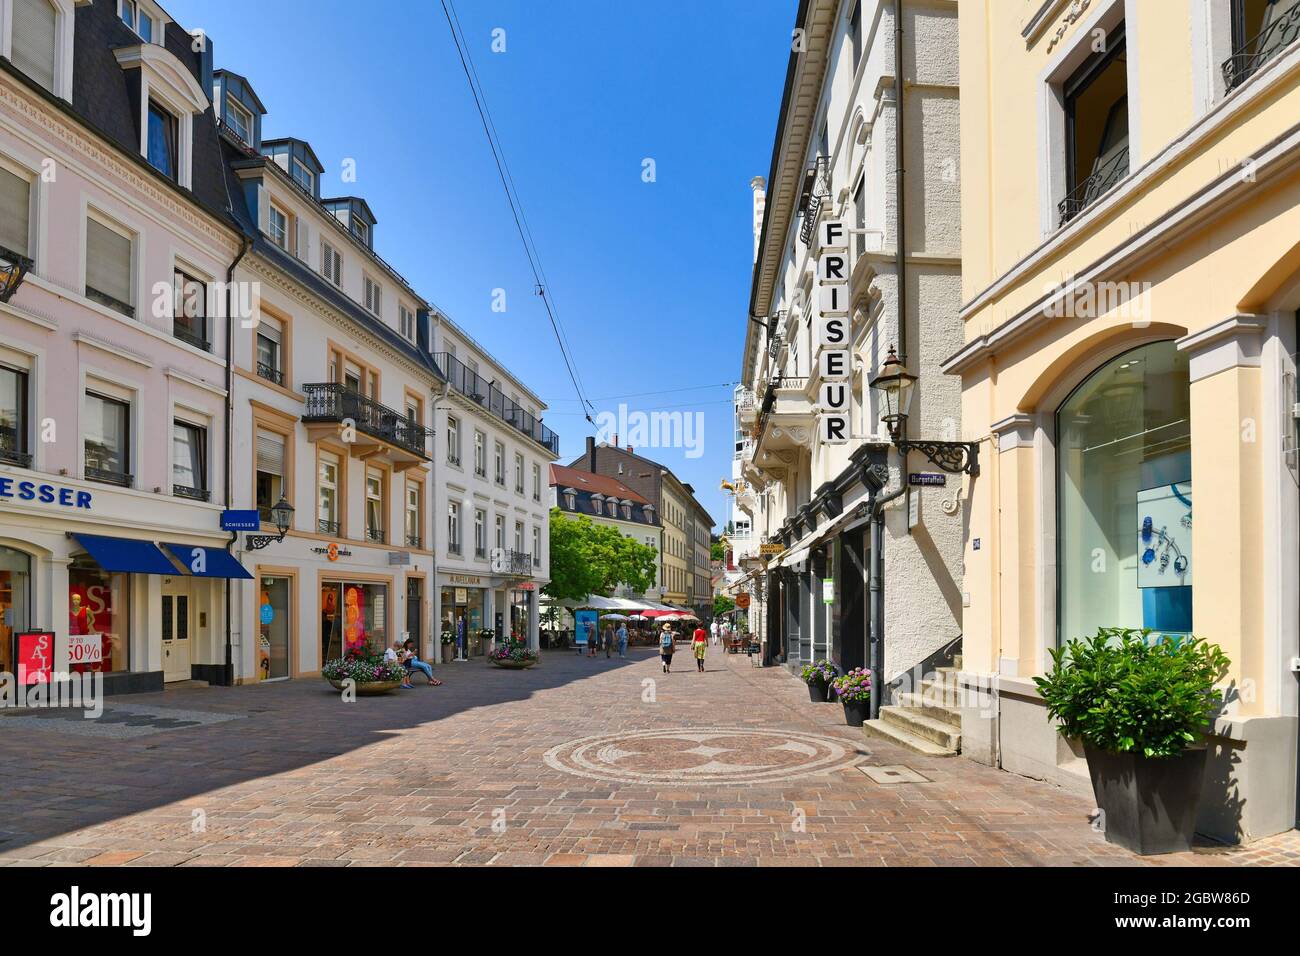 Baden-Baden, Germany - July 2021: Old historic city center with shops in spa town Baden-Baden on sunny day Stock Photo